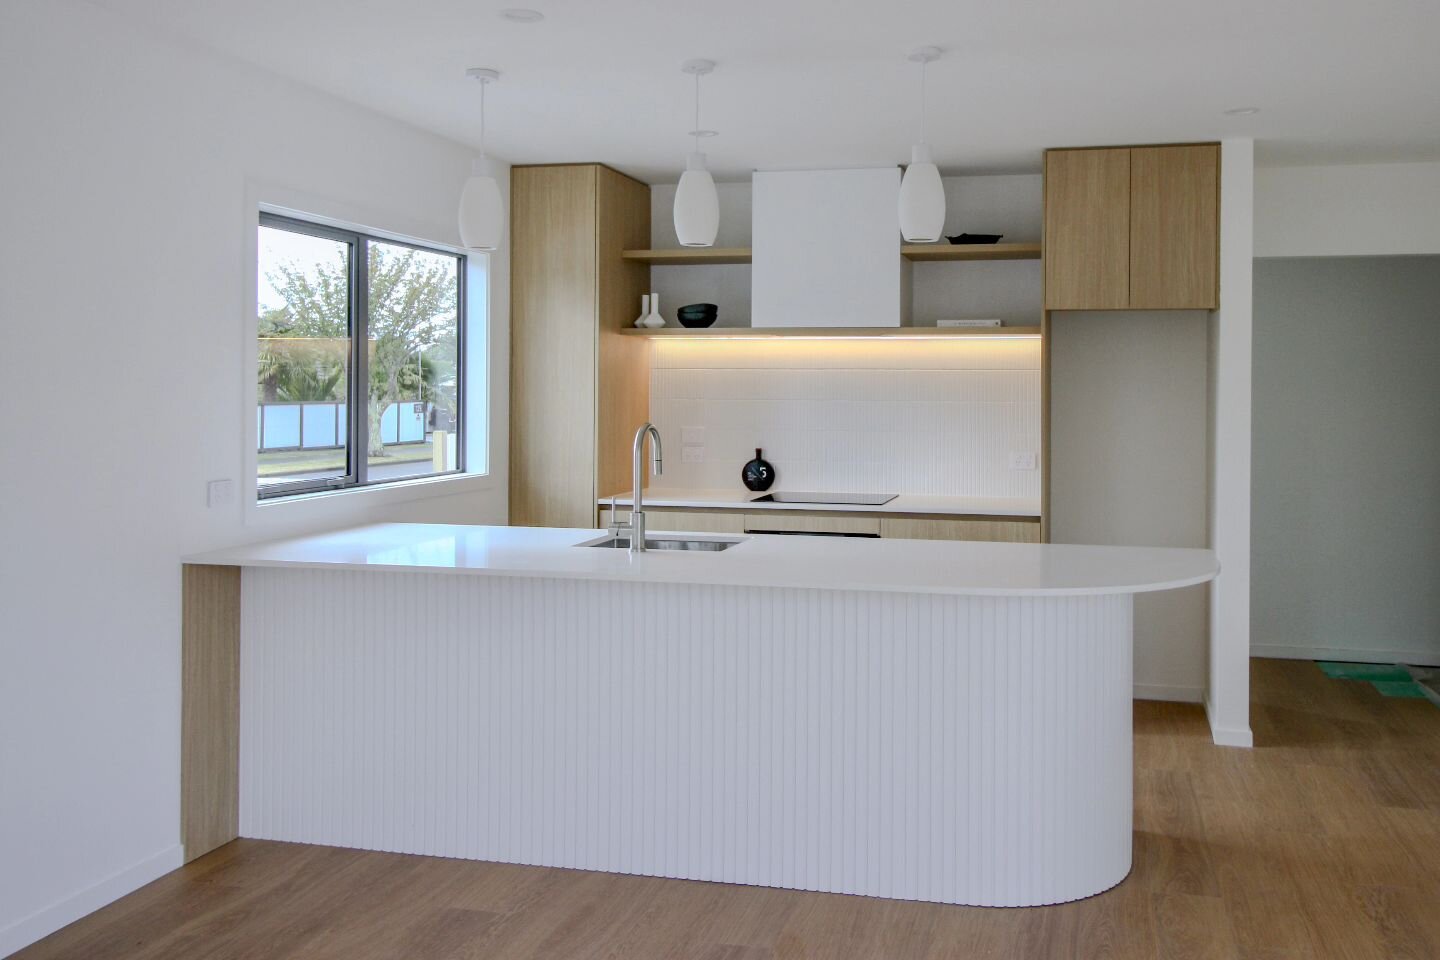 1 of 4 kitchens at our Napier development project, featuring a curved island and crisp surfaces 🤍
Ready for their new owners very soon! 

#kitchendesign ##nzkitchendesigner #nzkitchens #kitchendesignnapier ##nzinteriordesigner #napierkitchens #curve